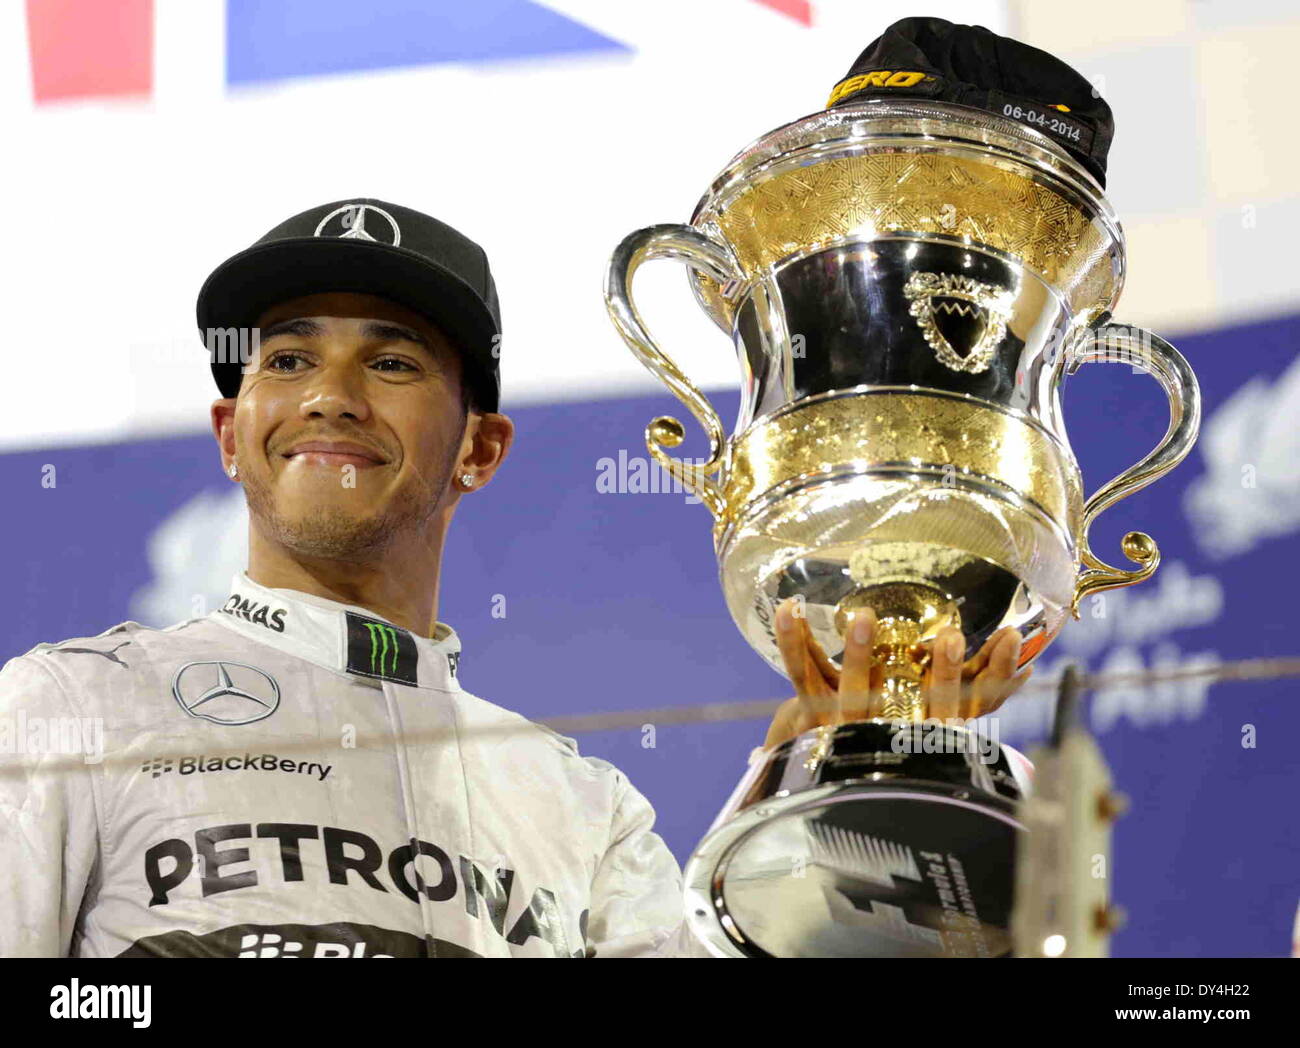 Manama, Bahrain. 06th Apr, 2014. Mercedes' Lewis Hamilton celebrates after the final of Formula 1 Bahrain Grand Prix in Manama, Bahrain, on April 6, 2014. Hamilton won the title with 1 hour 39 minutes and 42.743 seconds.  Credit:  Hasan Jamali/Xinhua/Alamy Live News Stock Photo